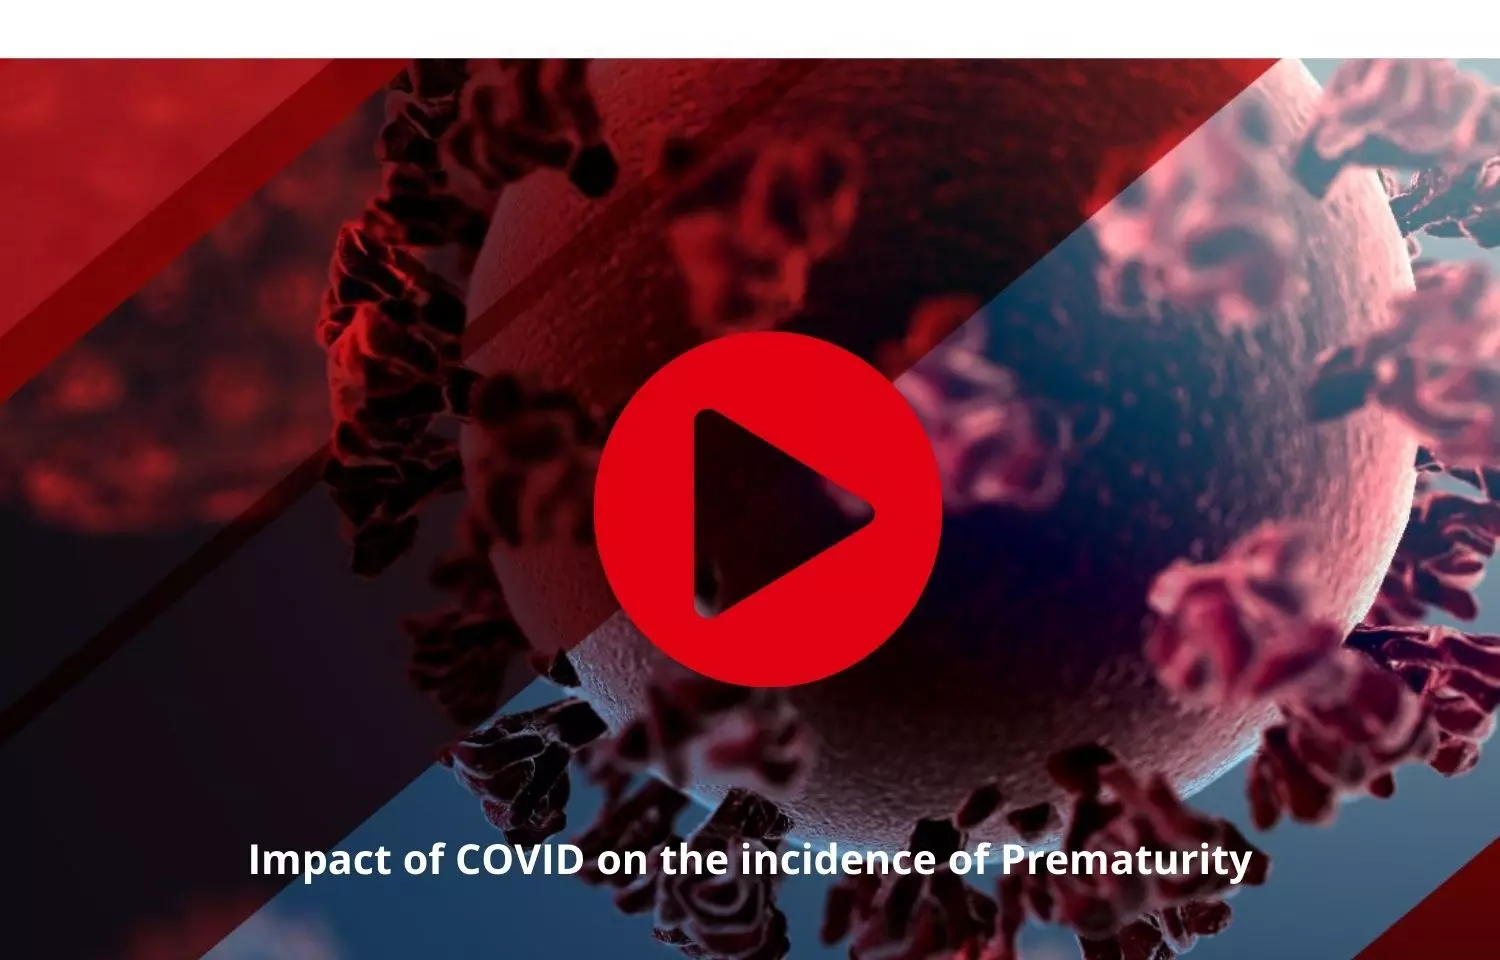 COVID to influence the incidence of Prematurity